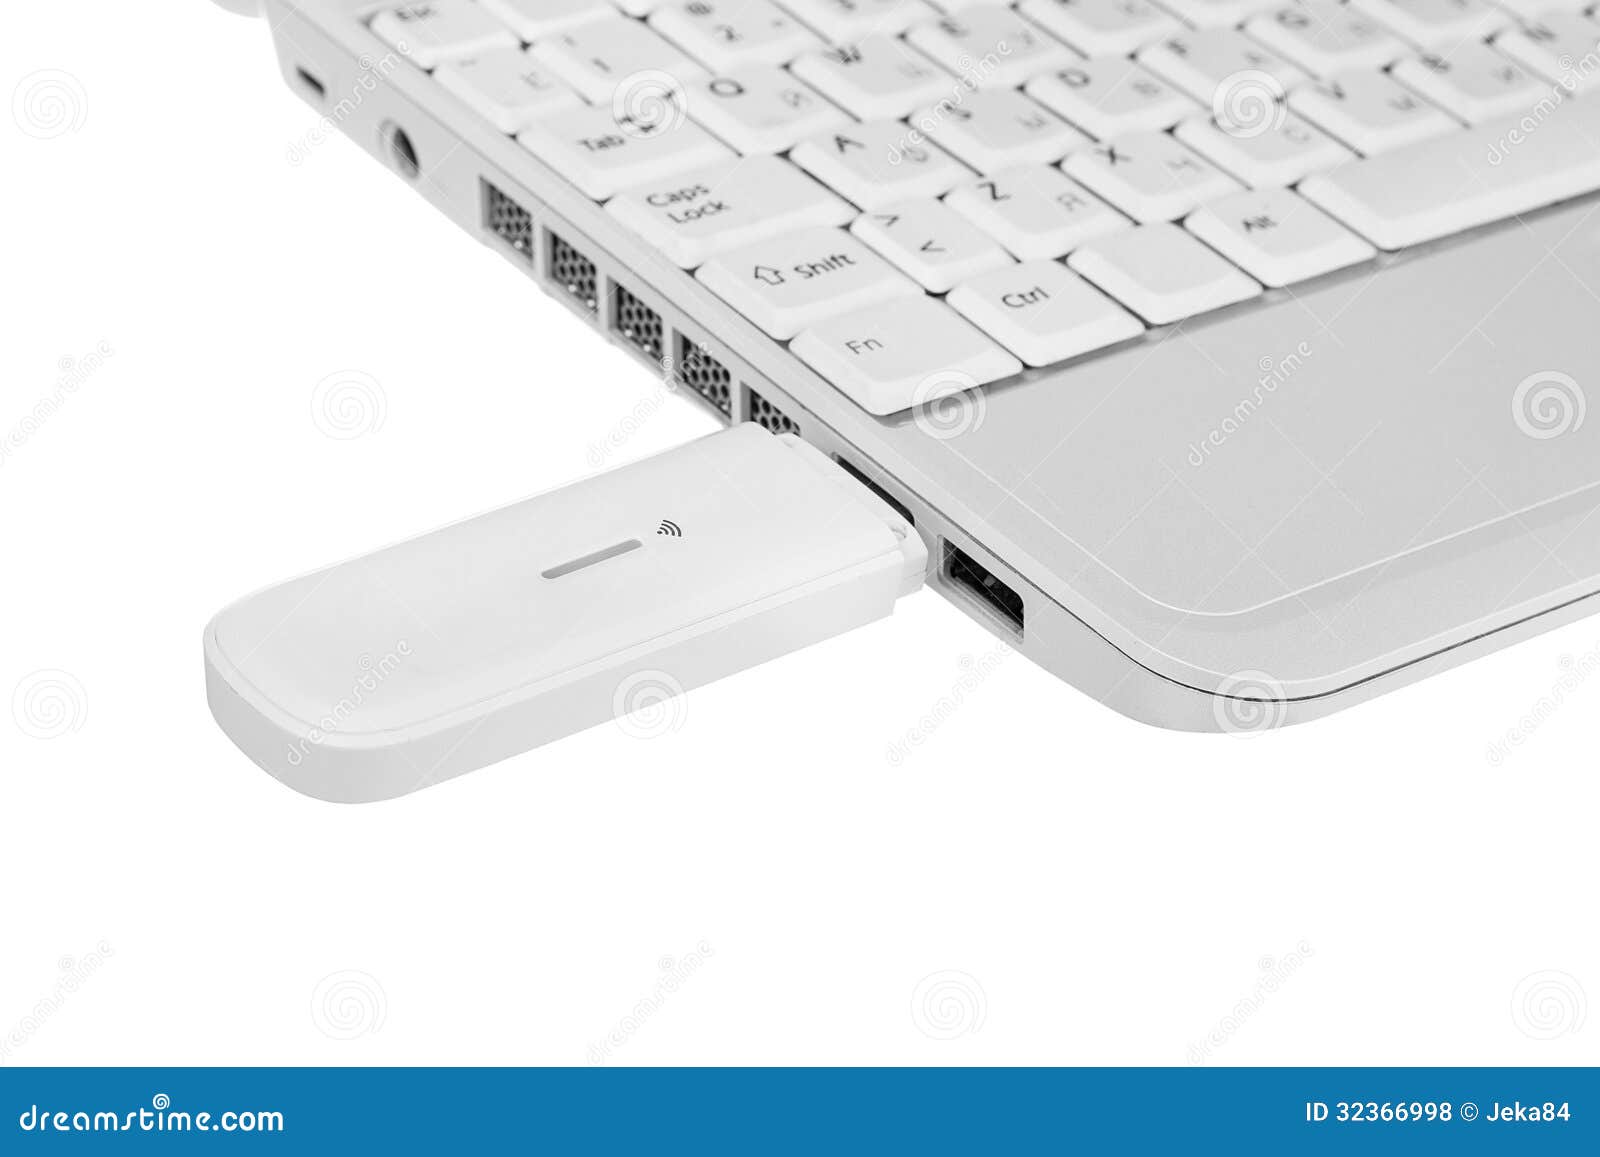 Laptops with wi fi modem stock photo Image of computer 32366998